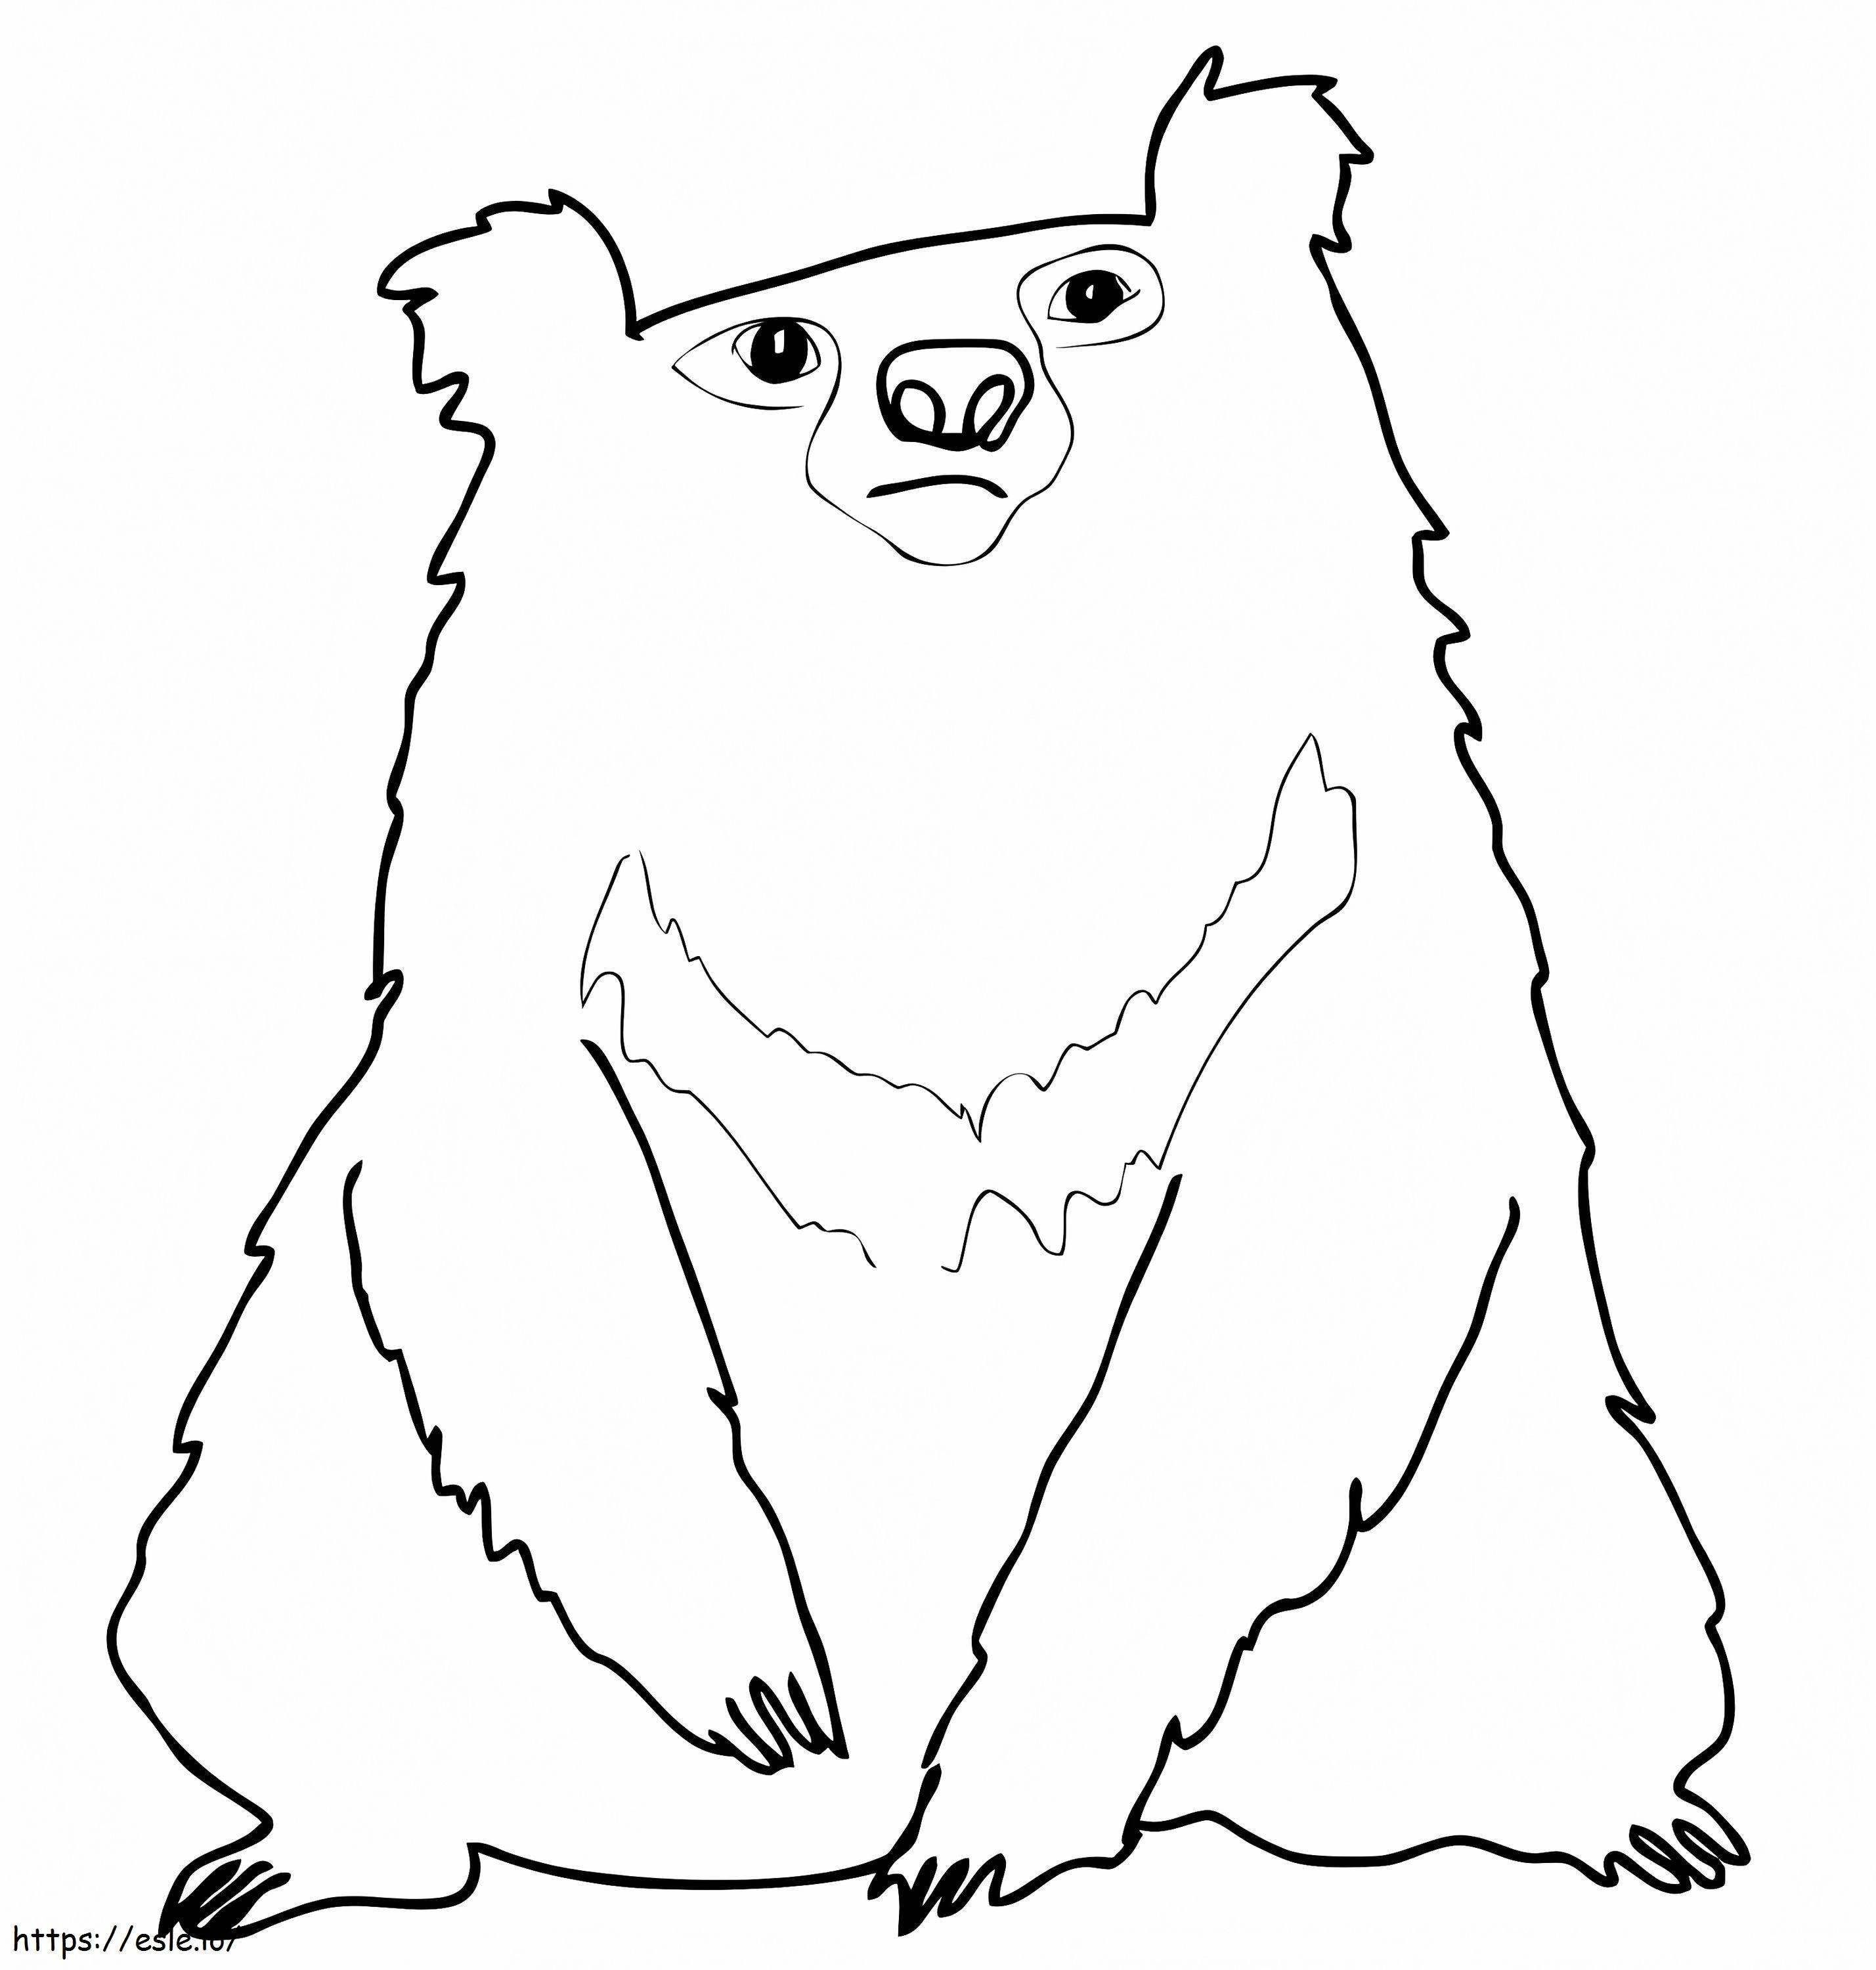 Indian Sloth Bear coloring page